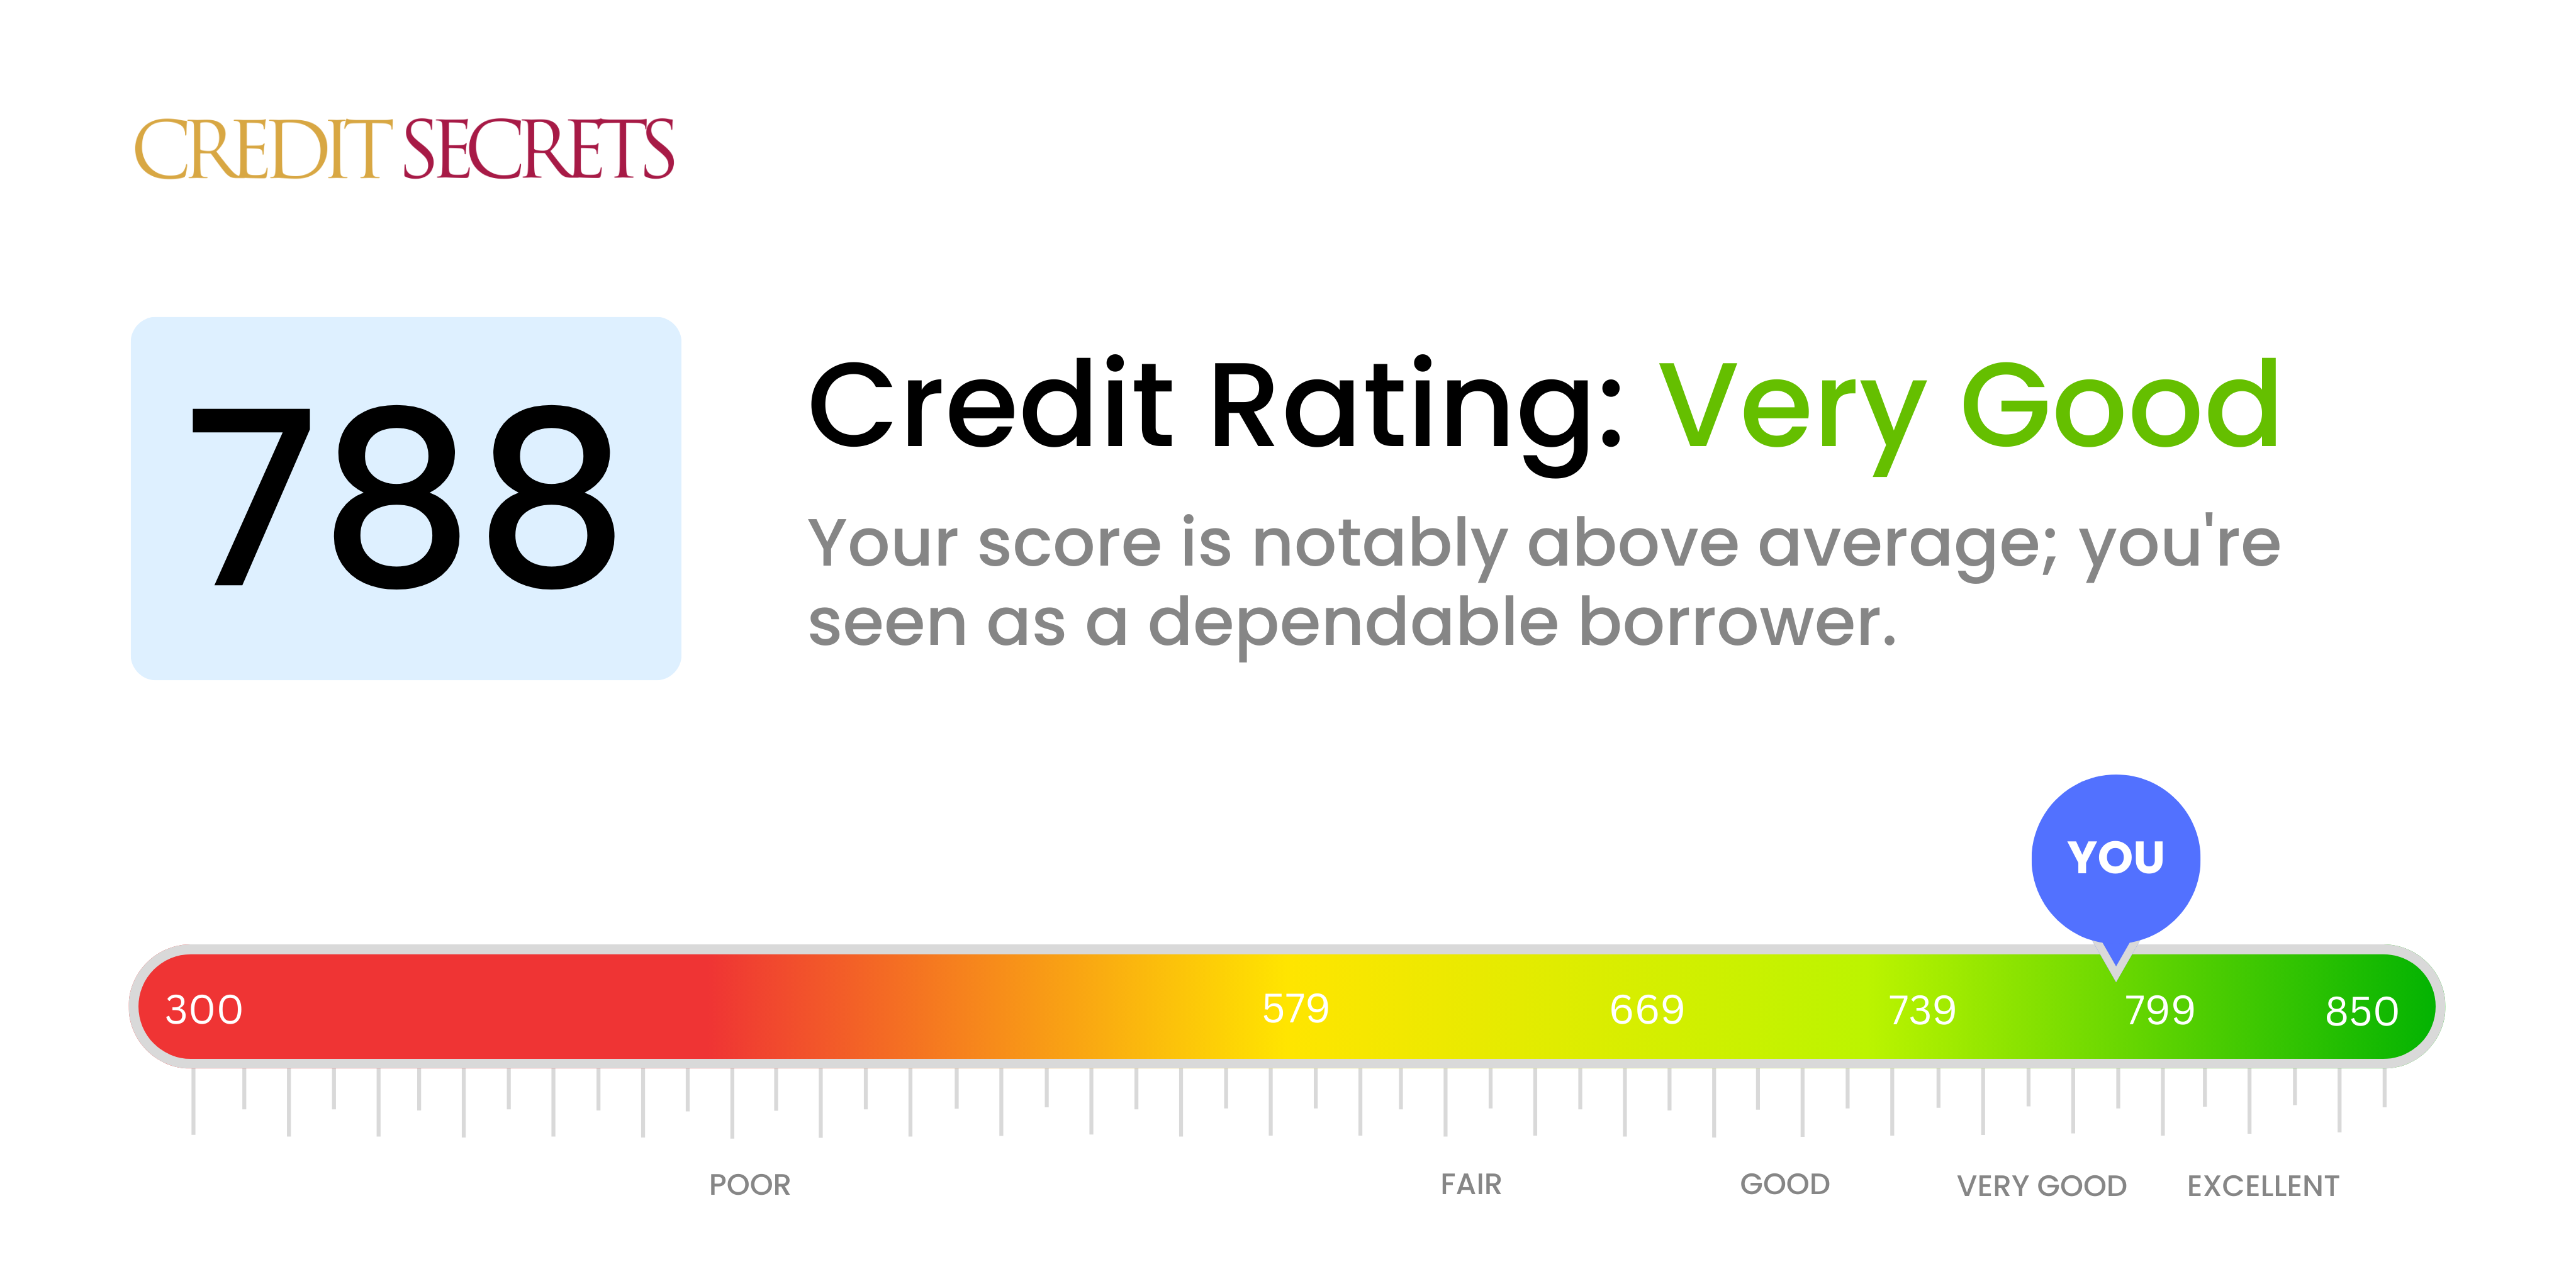 Is 788 a good credit score?